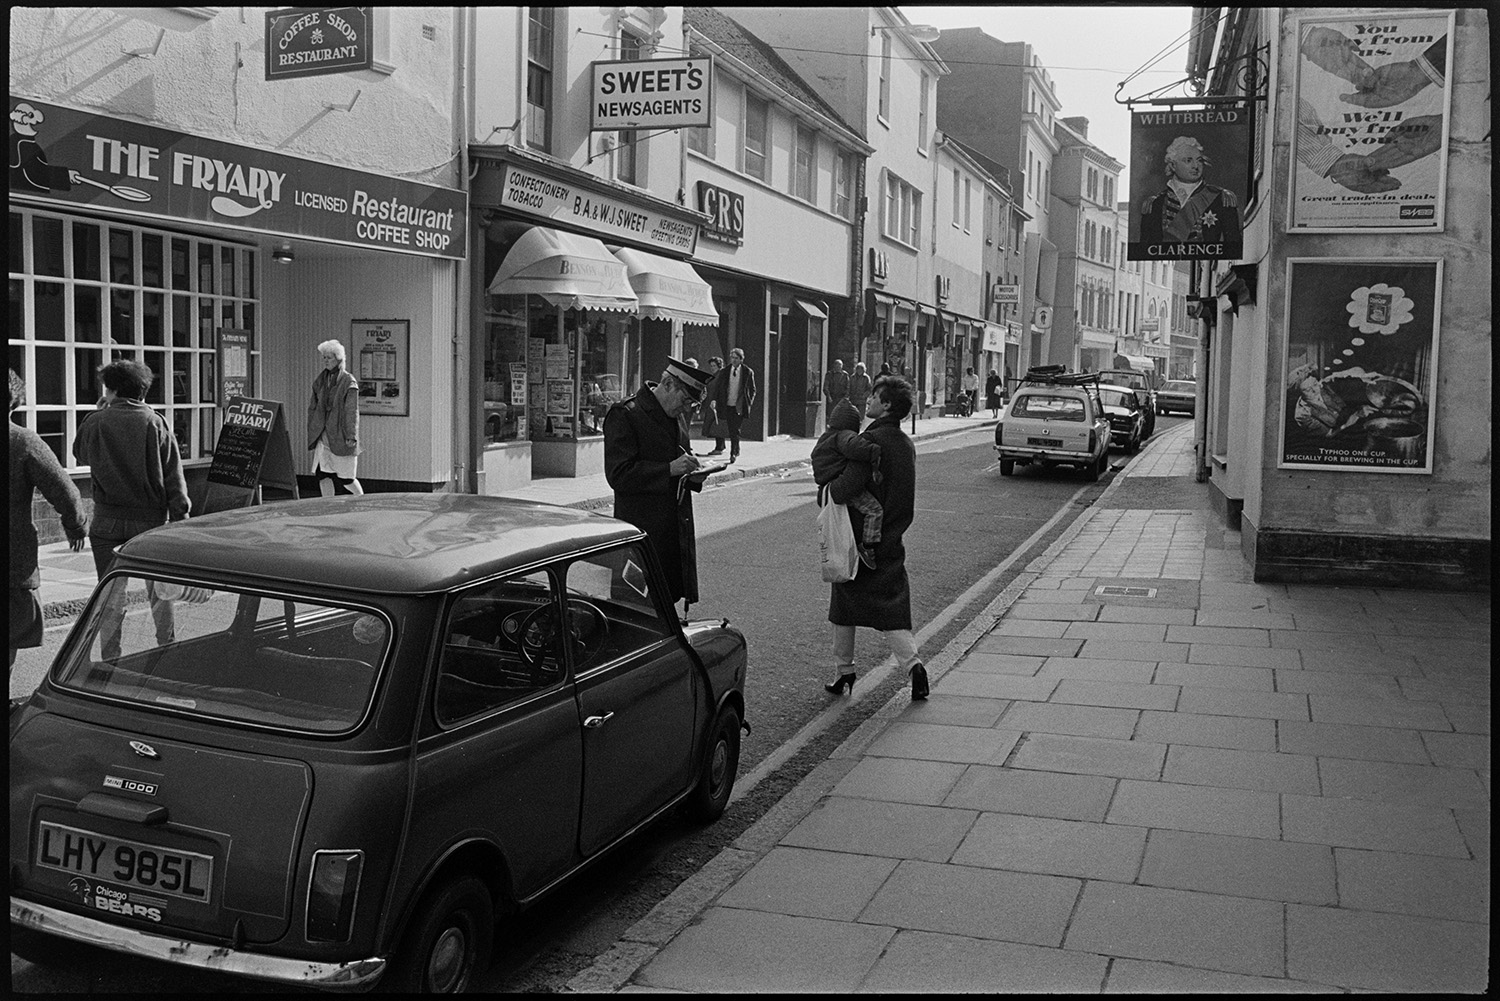 Street scene in High Street, Barnstaple, showing a traffic warden completing a parking ticket for a car parked on a restricted parking area.  Pedestrians are walking along pavements and shop signs can be seen for The Fryary restaurant, B.A. & W.J. Newsagents shop, and the Clarence pub which is now called the Cork and Bottle.